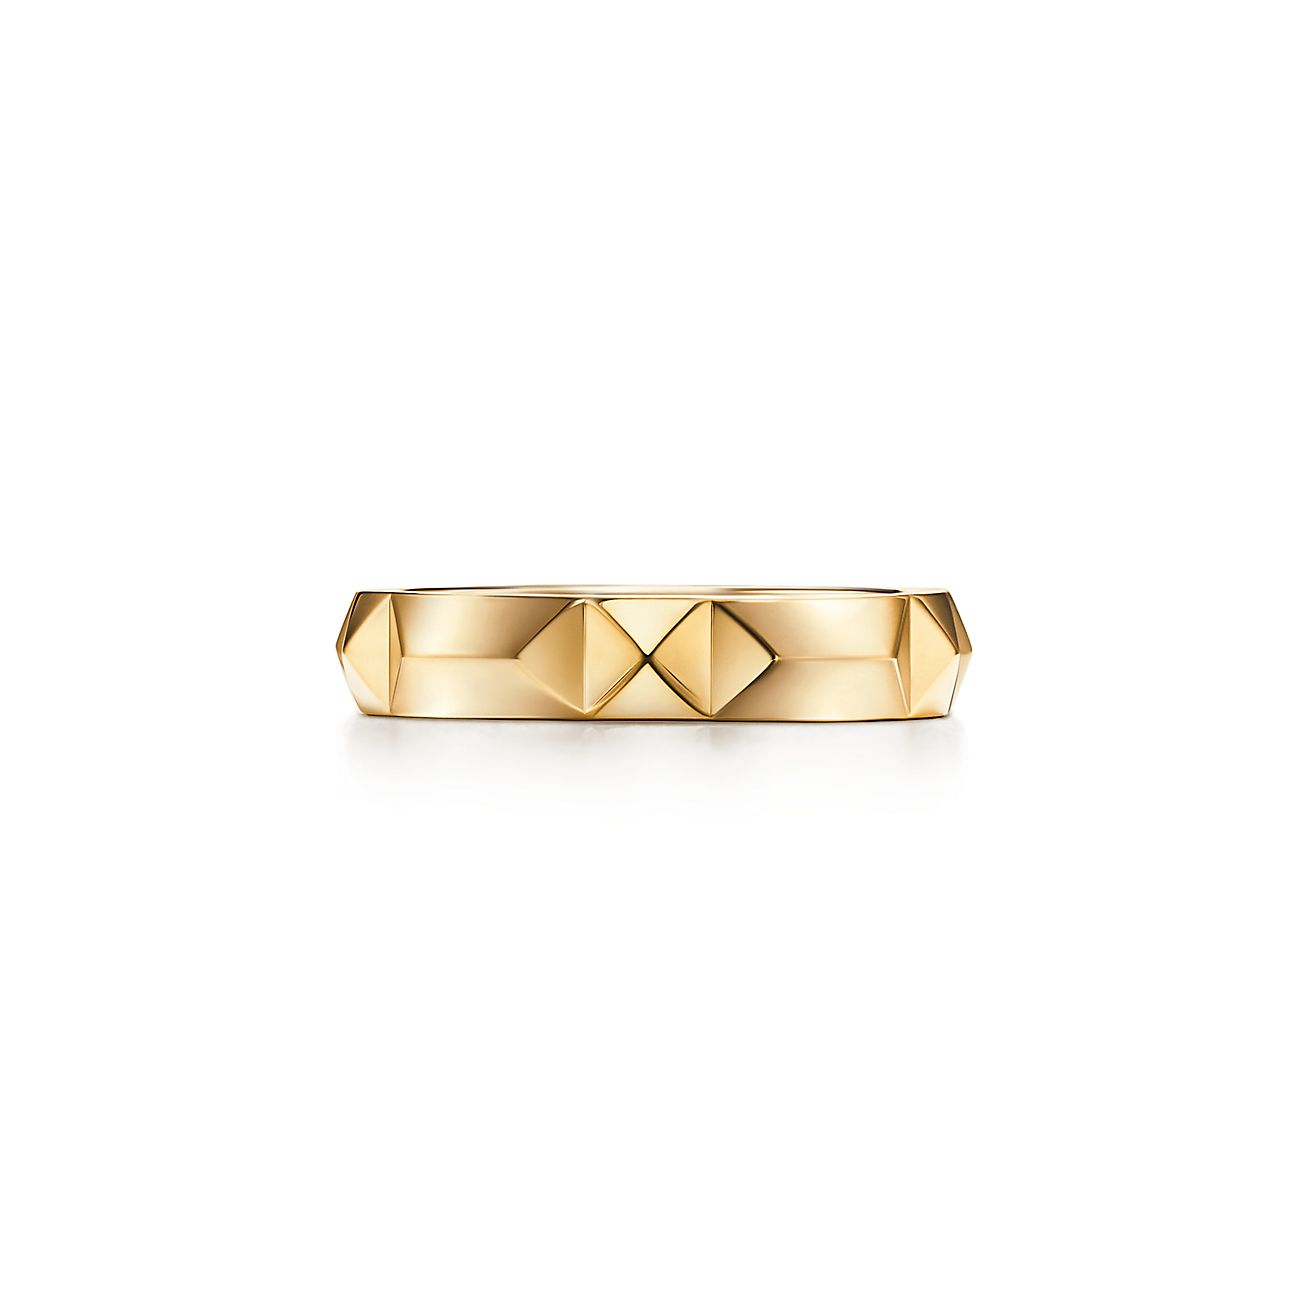 Tiffany True™ Band Ring in Yellow Gold, 4 mm Wide | Tiffany & Co.